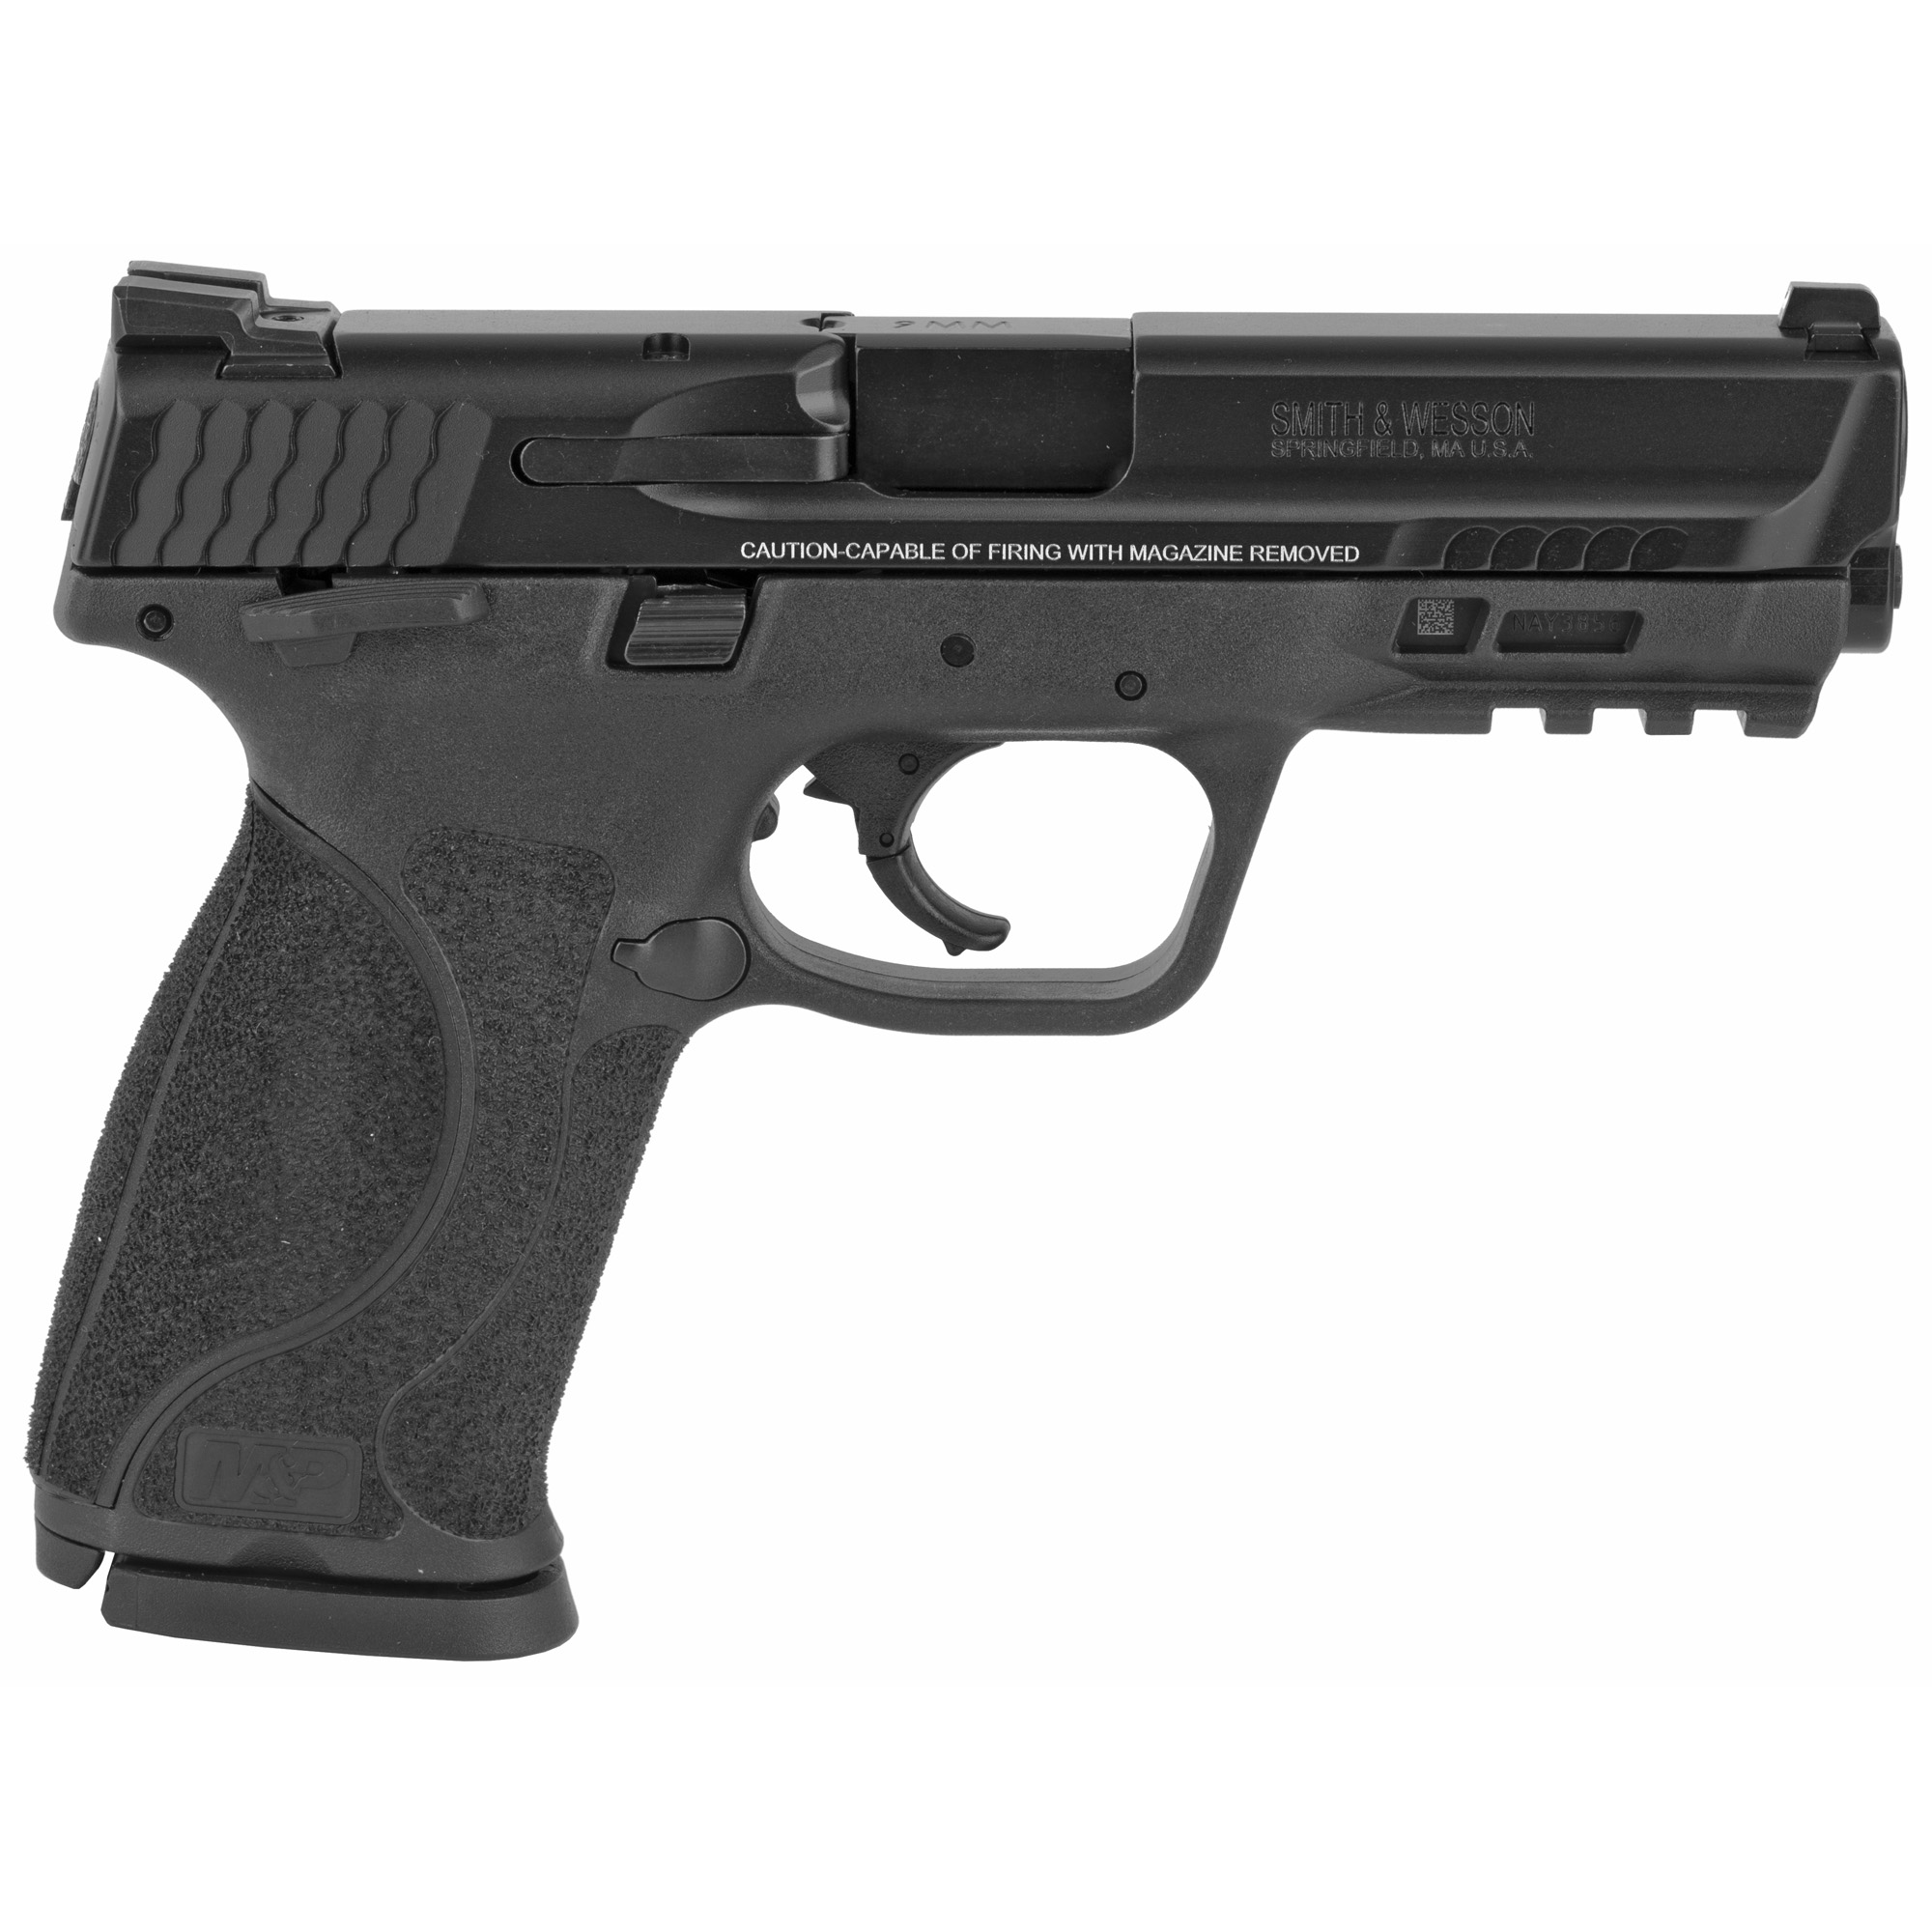 Smith & Wesson, M&P 2.0, Striker Fired, Semi-automatic, Polymer Frame Pistol, Full Size, 9MM, 4.25" Barrel, Armornite Finish, Black, Fixed Sights, Manual Thumb Safety, No Magazine Safety, 17 Rounds, 2 Magazines